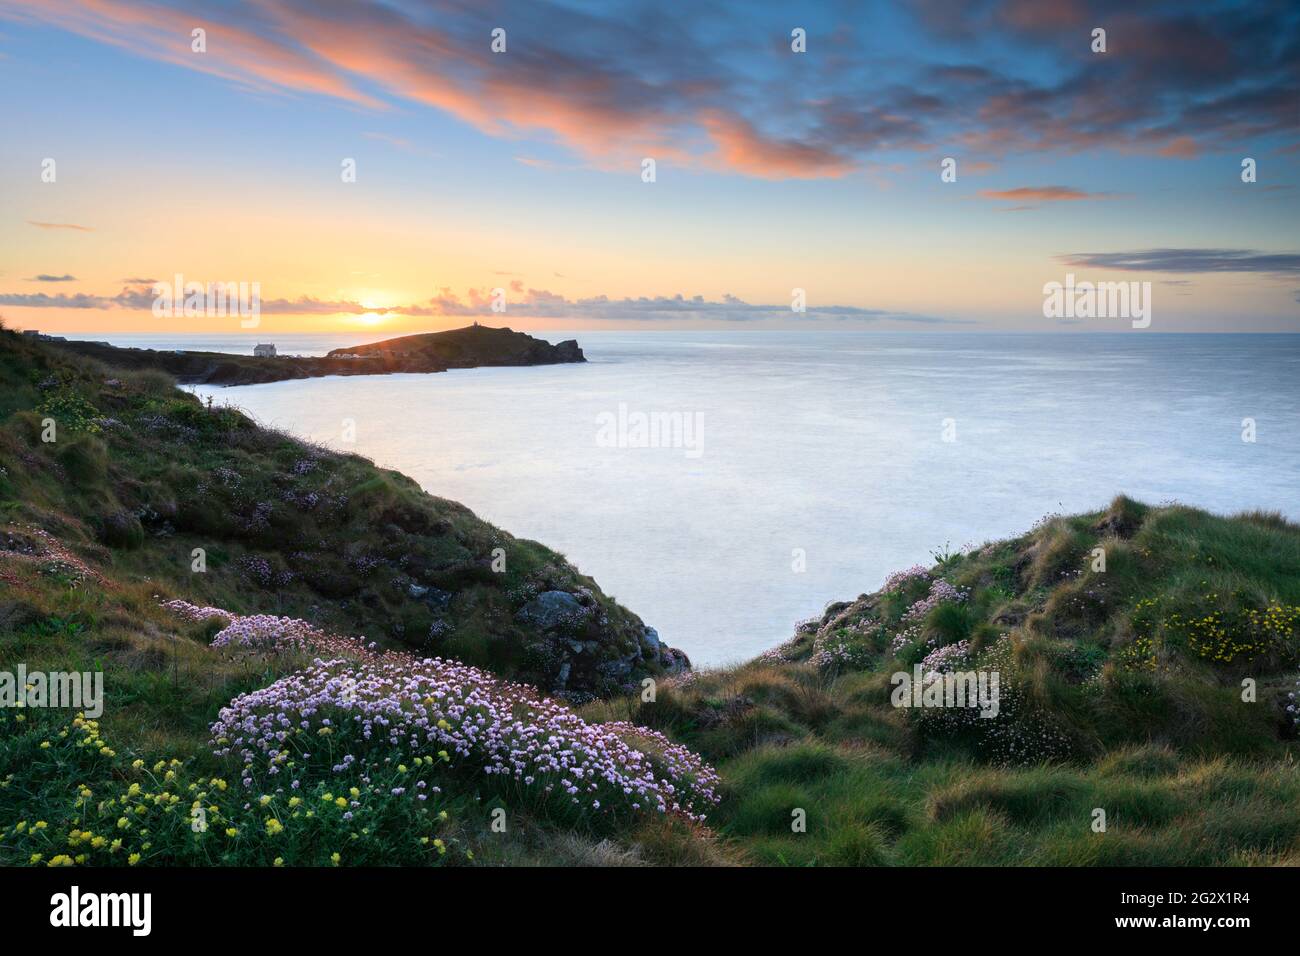 Towan Head near Newquay on the north coast of Cornwall.  The image was captured at sunset in the spring using a long exposure to blur the water. Stock Photo